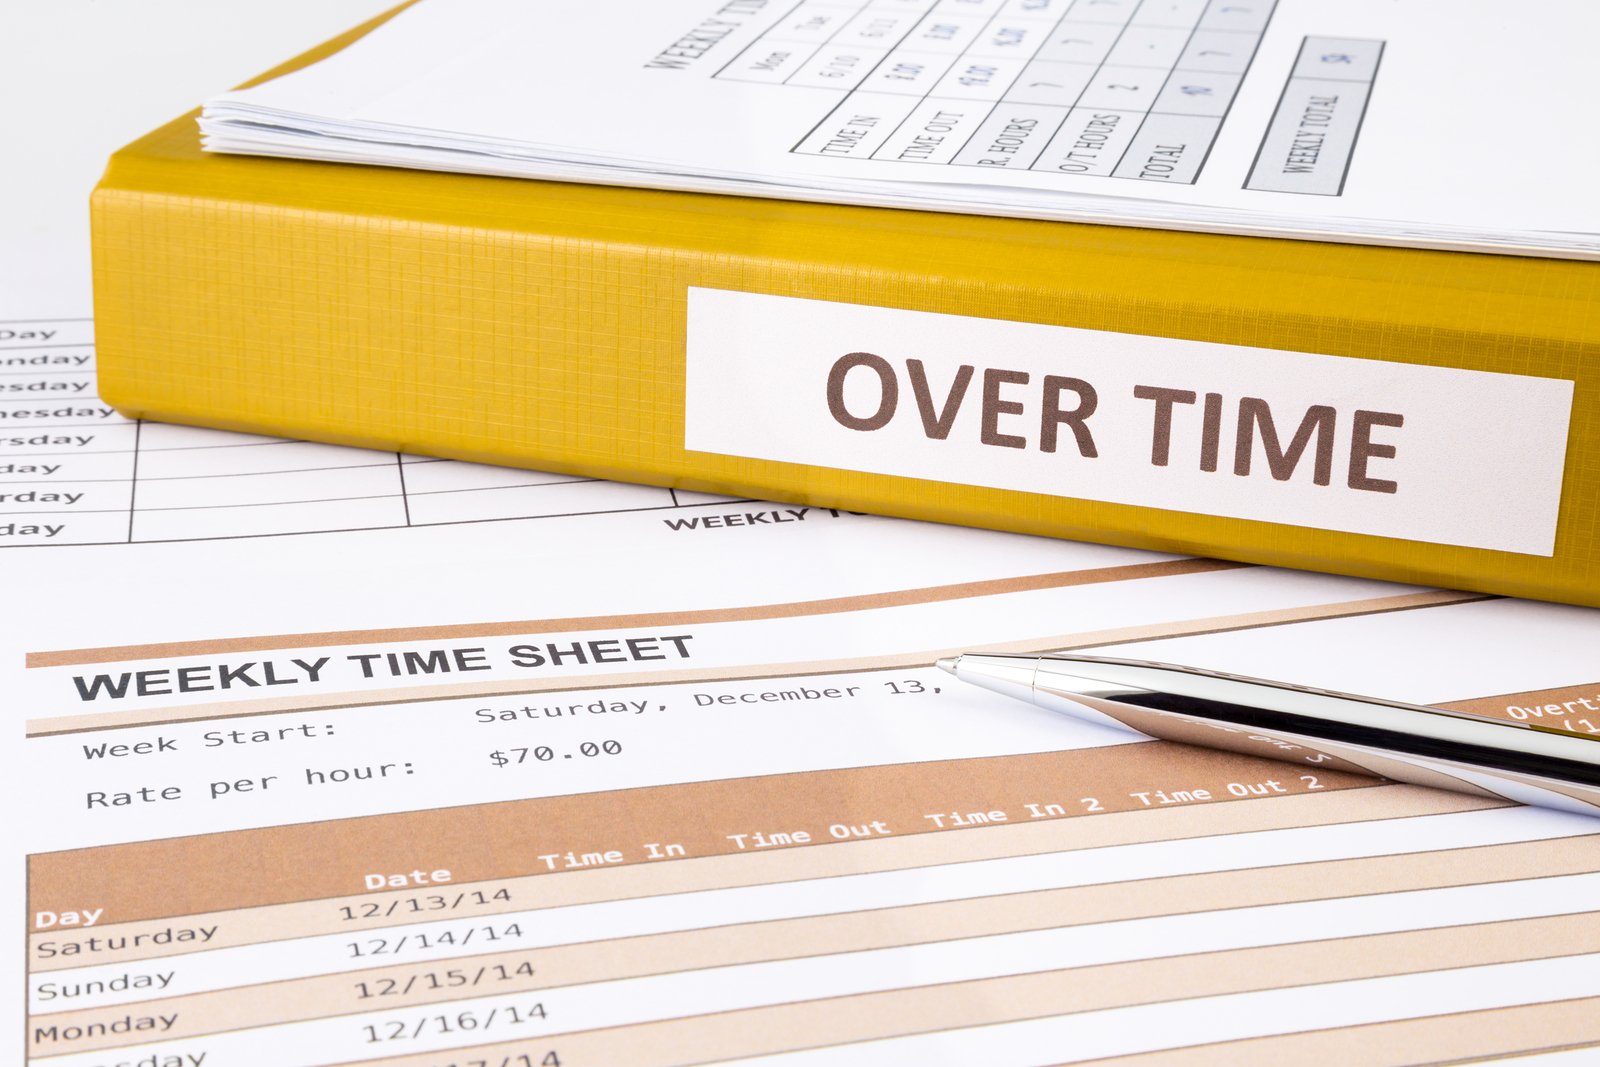 Wage Theft & Unpaid Overtime